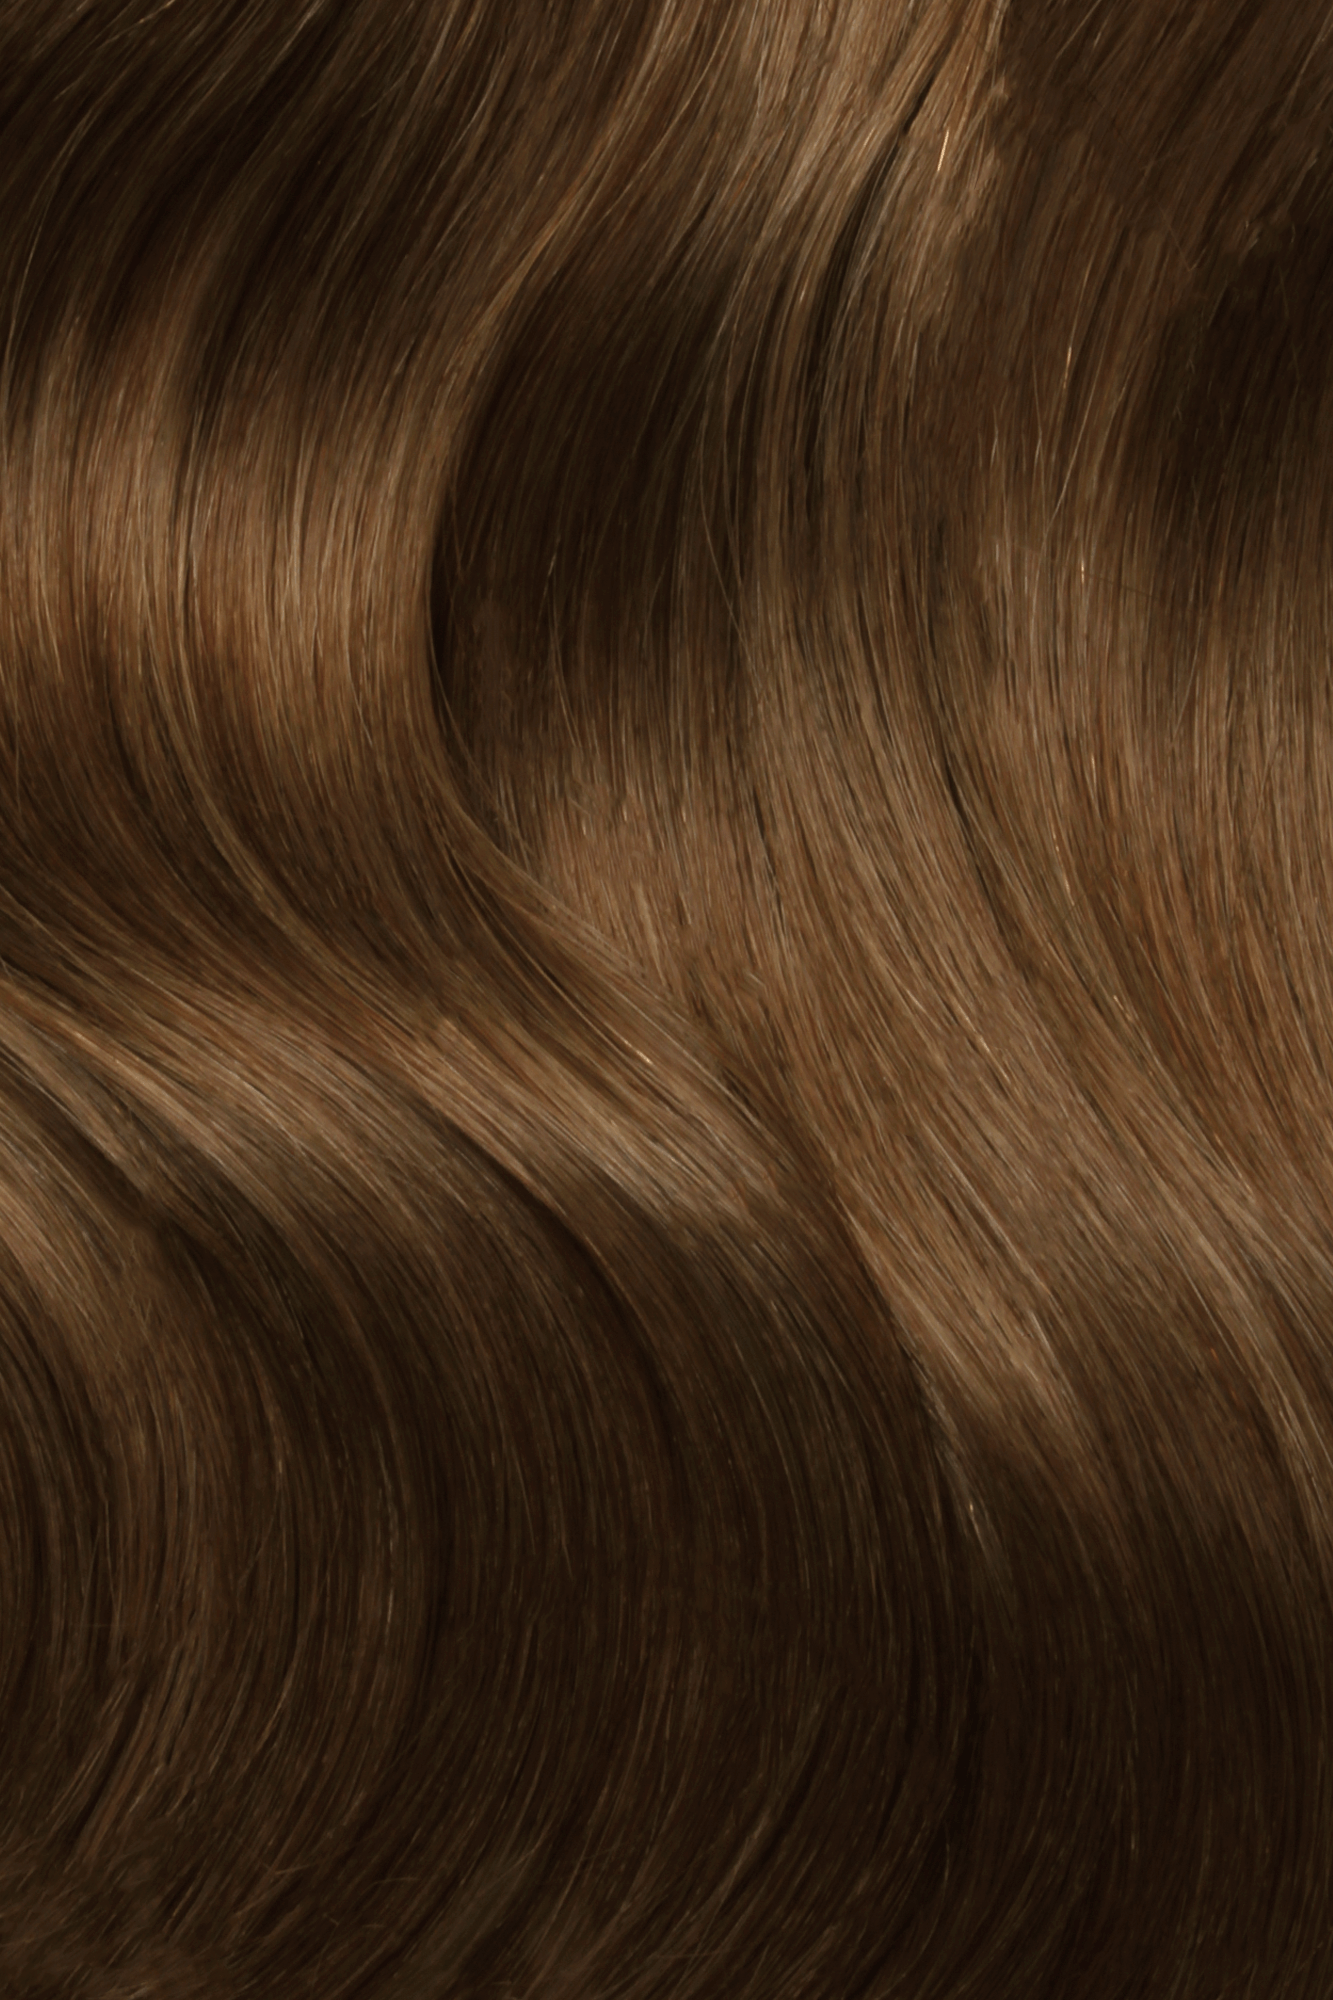 SEAMLESS® Flat Weft 24 Inches - SWAY Hair Extensions Chestnut-Brown-4 Natural SEAMLESS® Flat Weft 24 Inches extensions. Thin, flexible, and discreet. 100% Double Drawn Remy Human Hair. Versatile and reusable